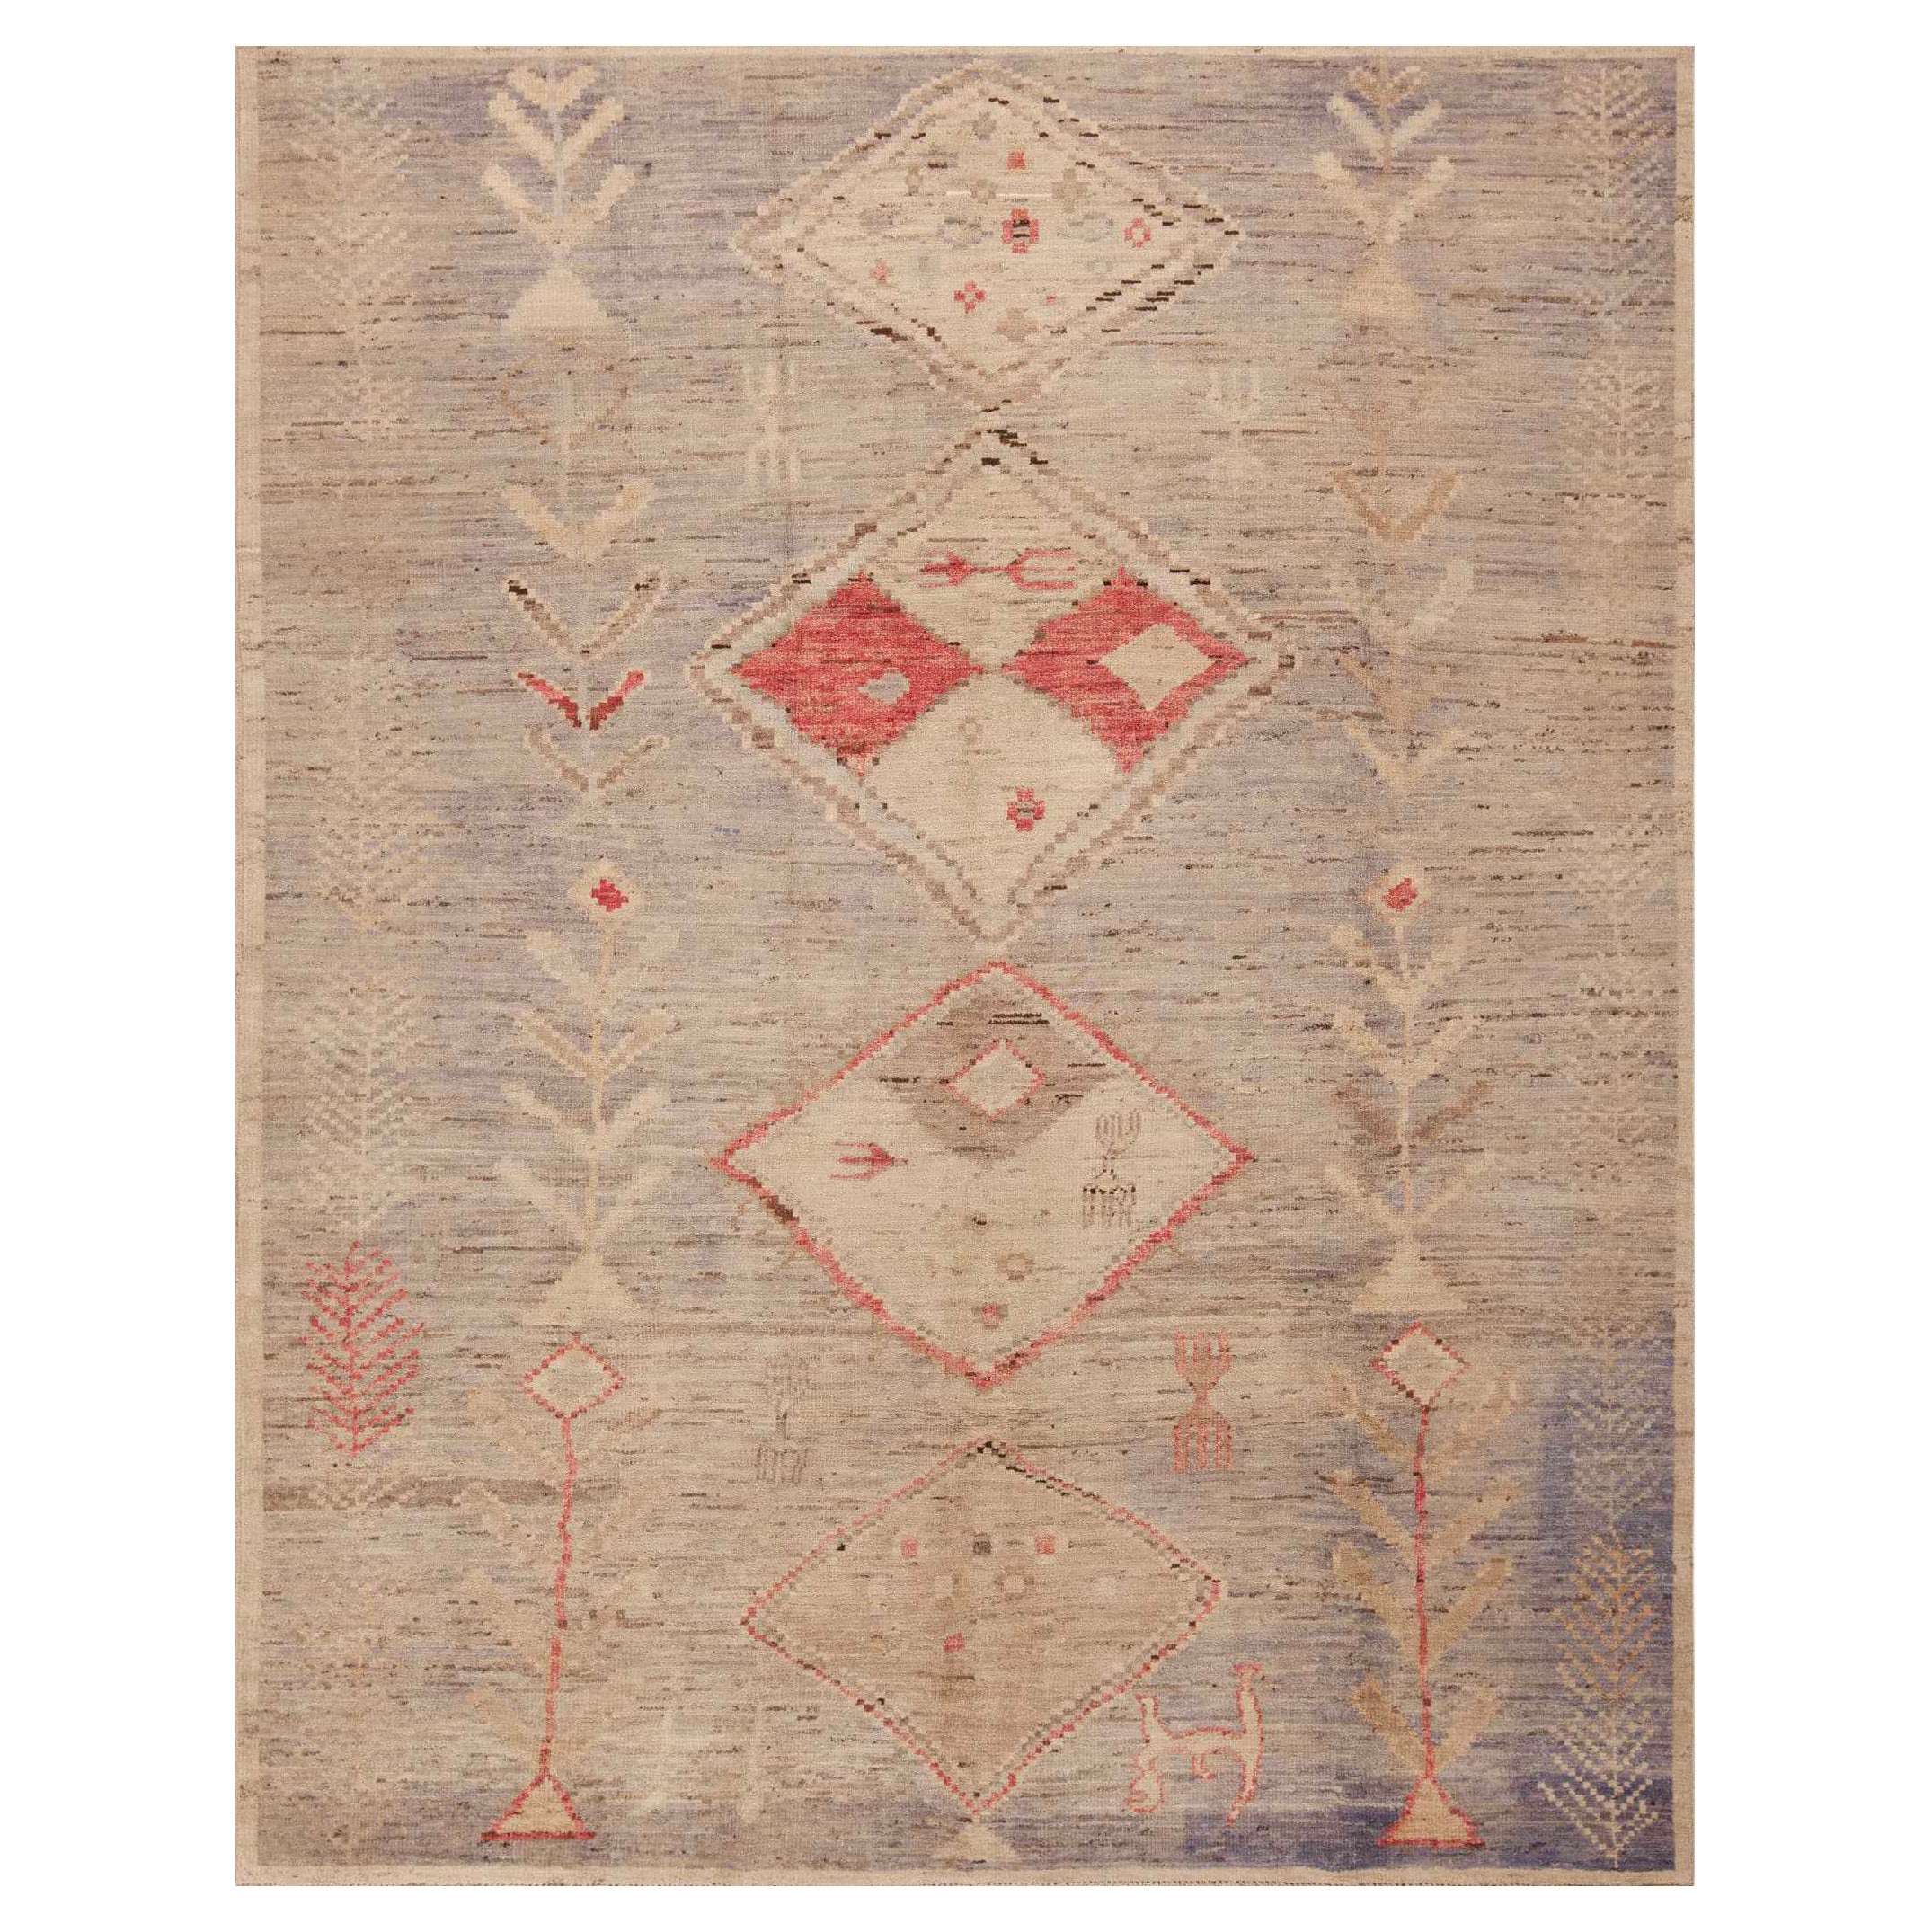 Nazmiyal Collection Neutral Color Tribal Geometric Modern Area Rug 7'10" x 10'2"